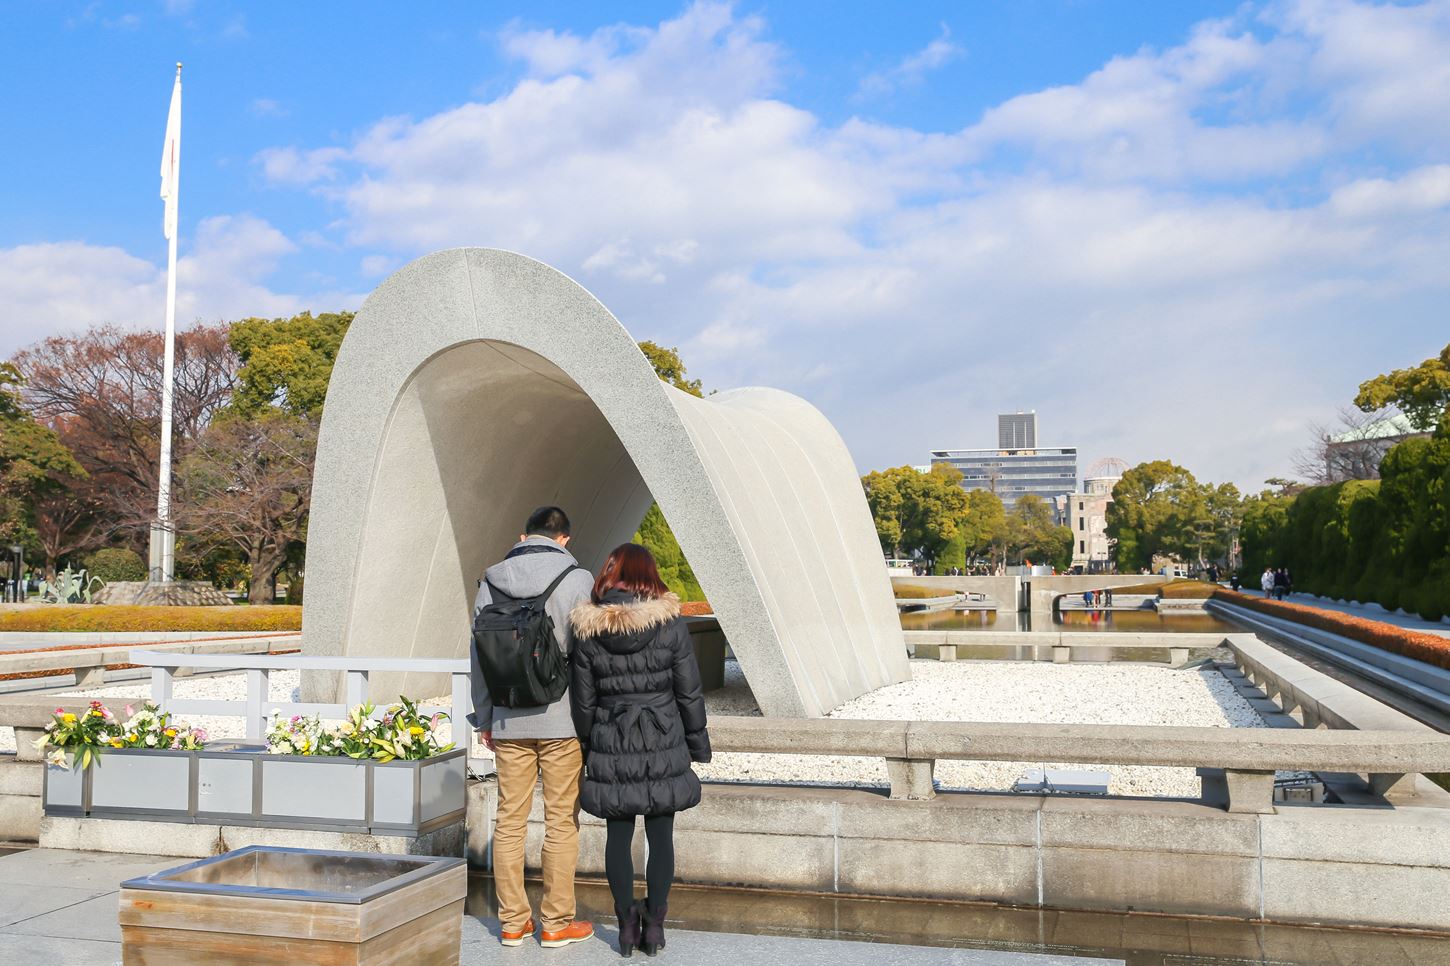 Sightseeing scenery that simply shows the weather Hiroshima in December4